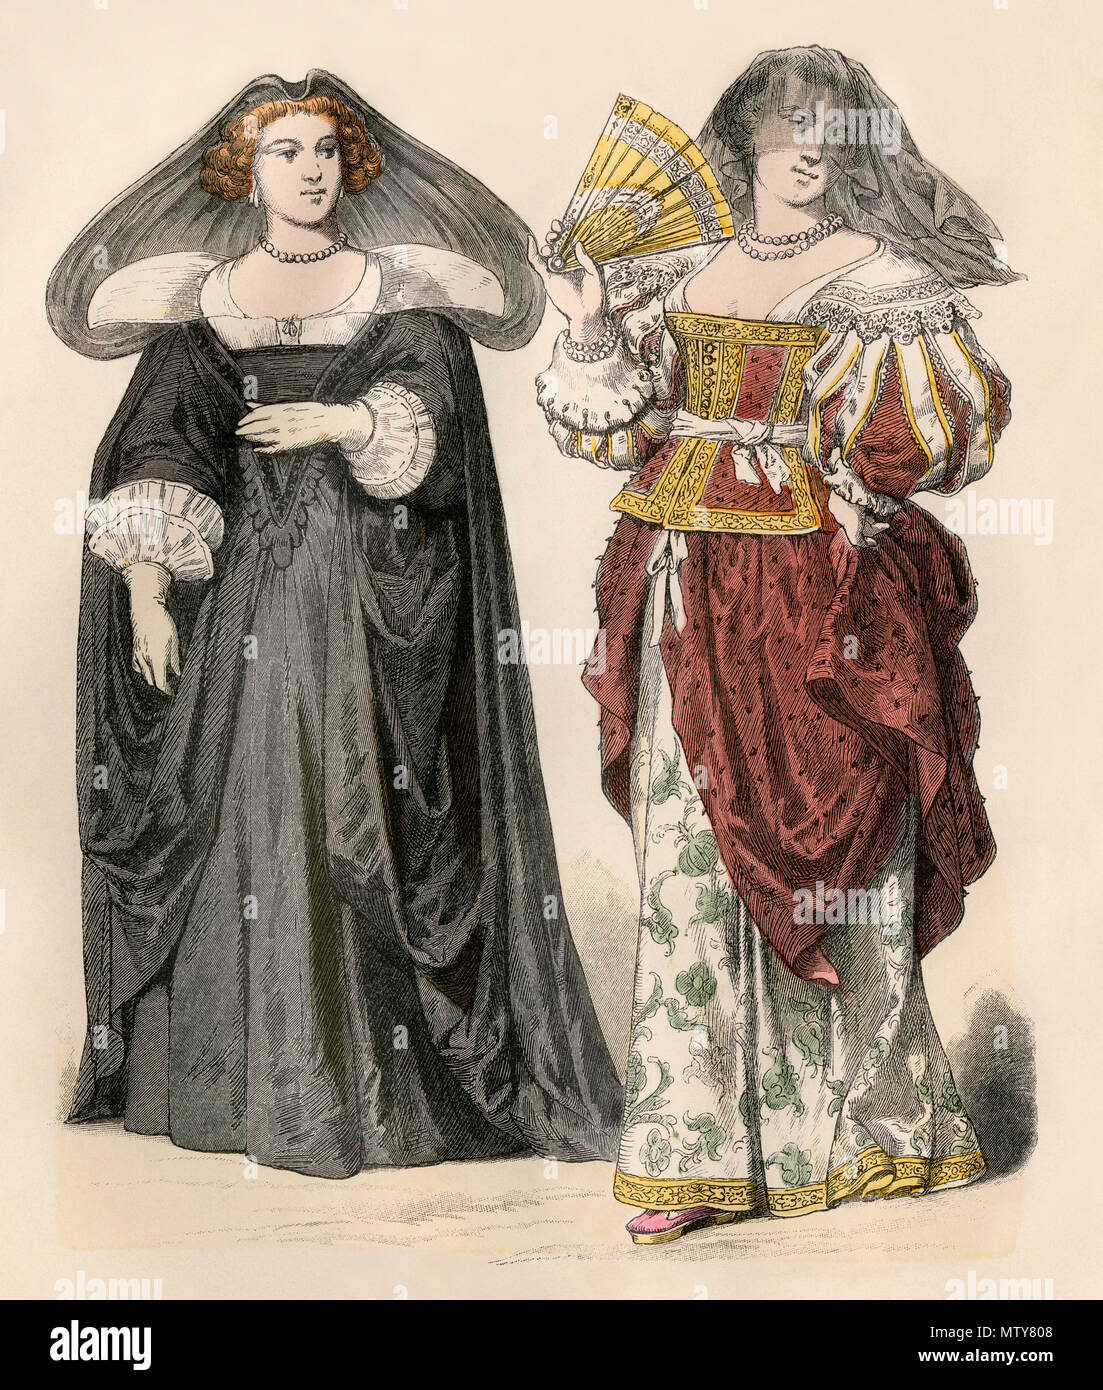 Woman in mourning and woman with fan, fashion of 1600s. Hand-colored print Stock Photo